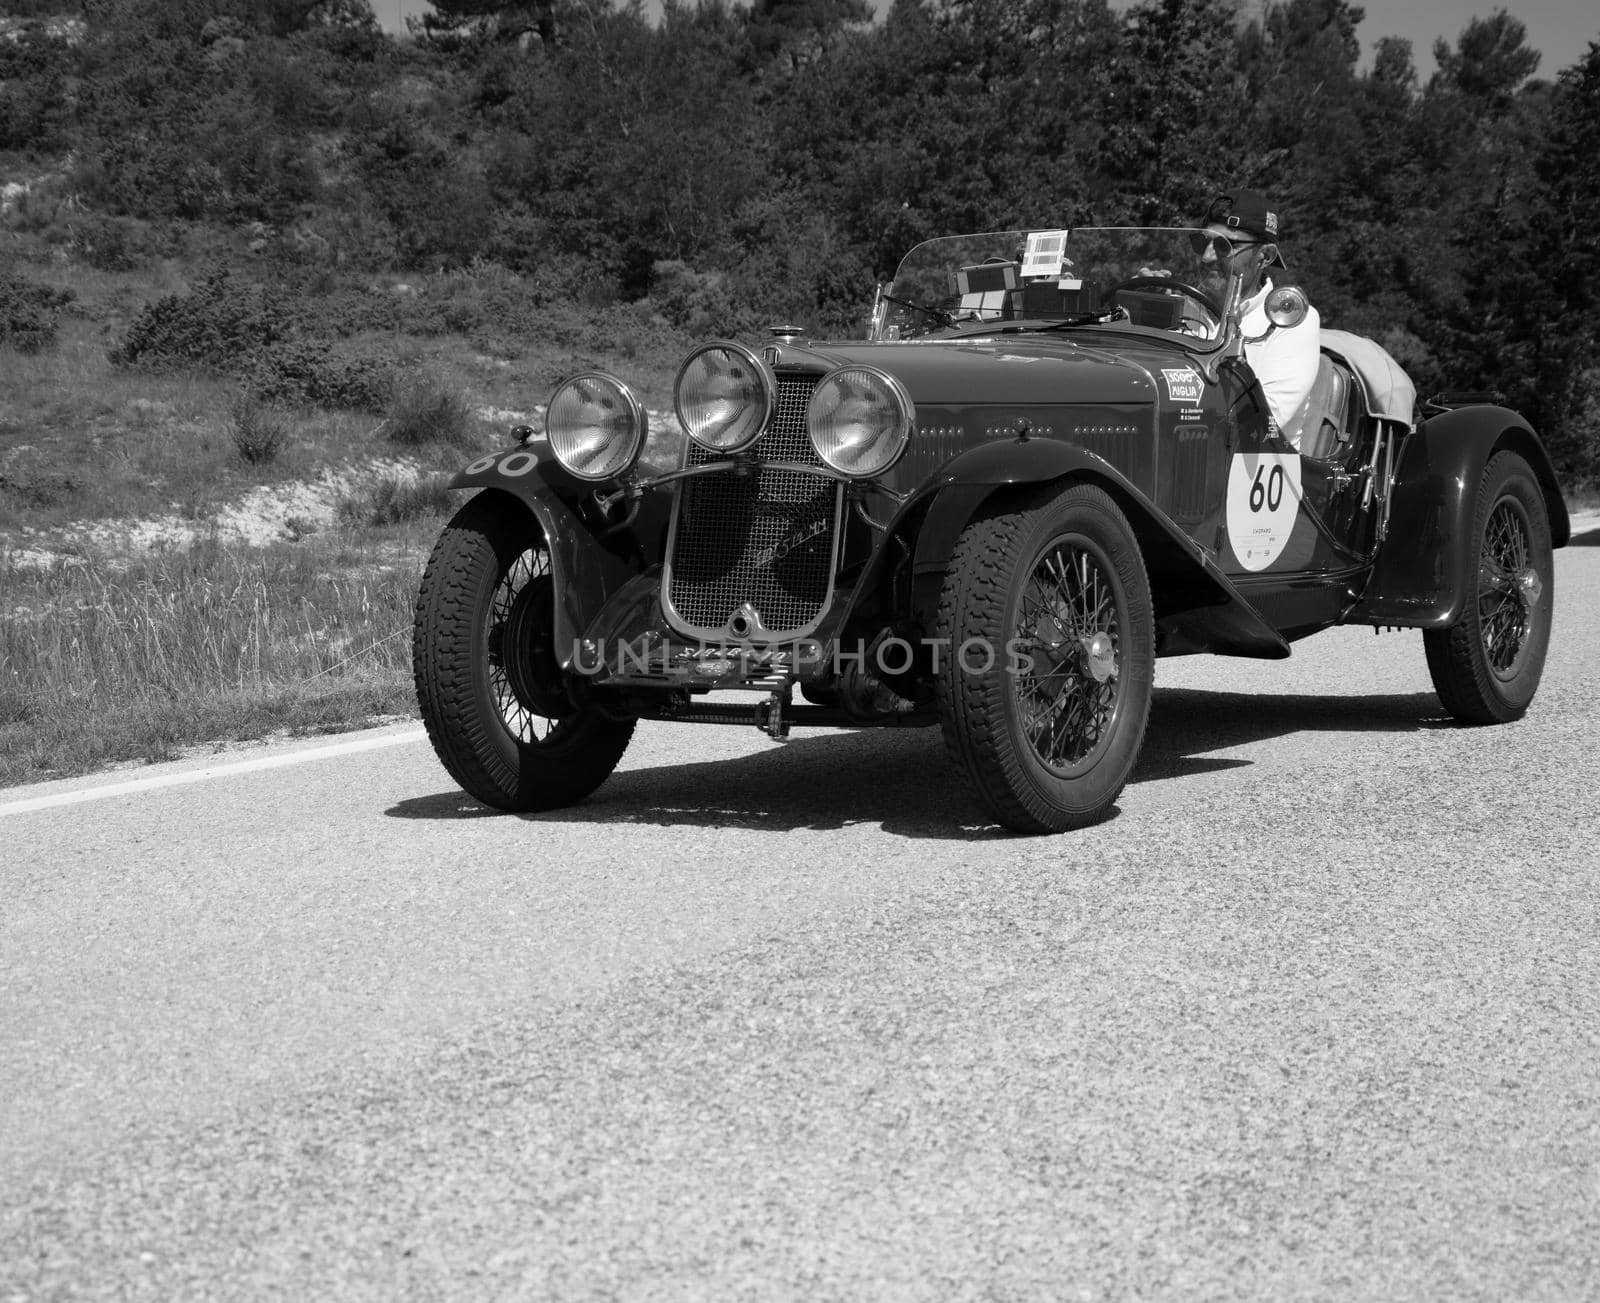 FIAT 514 MM 1930 on an old racing car in rally Mille Miglia 2022 the famous italian historical race (1927-1957 by massimocampanari